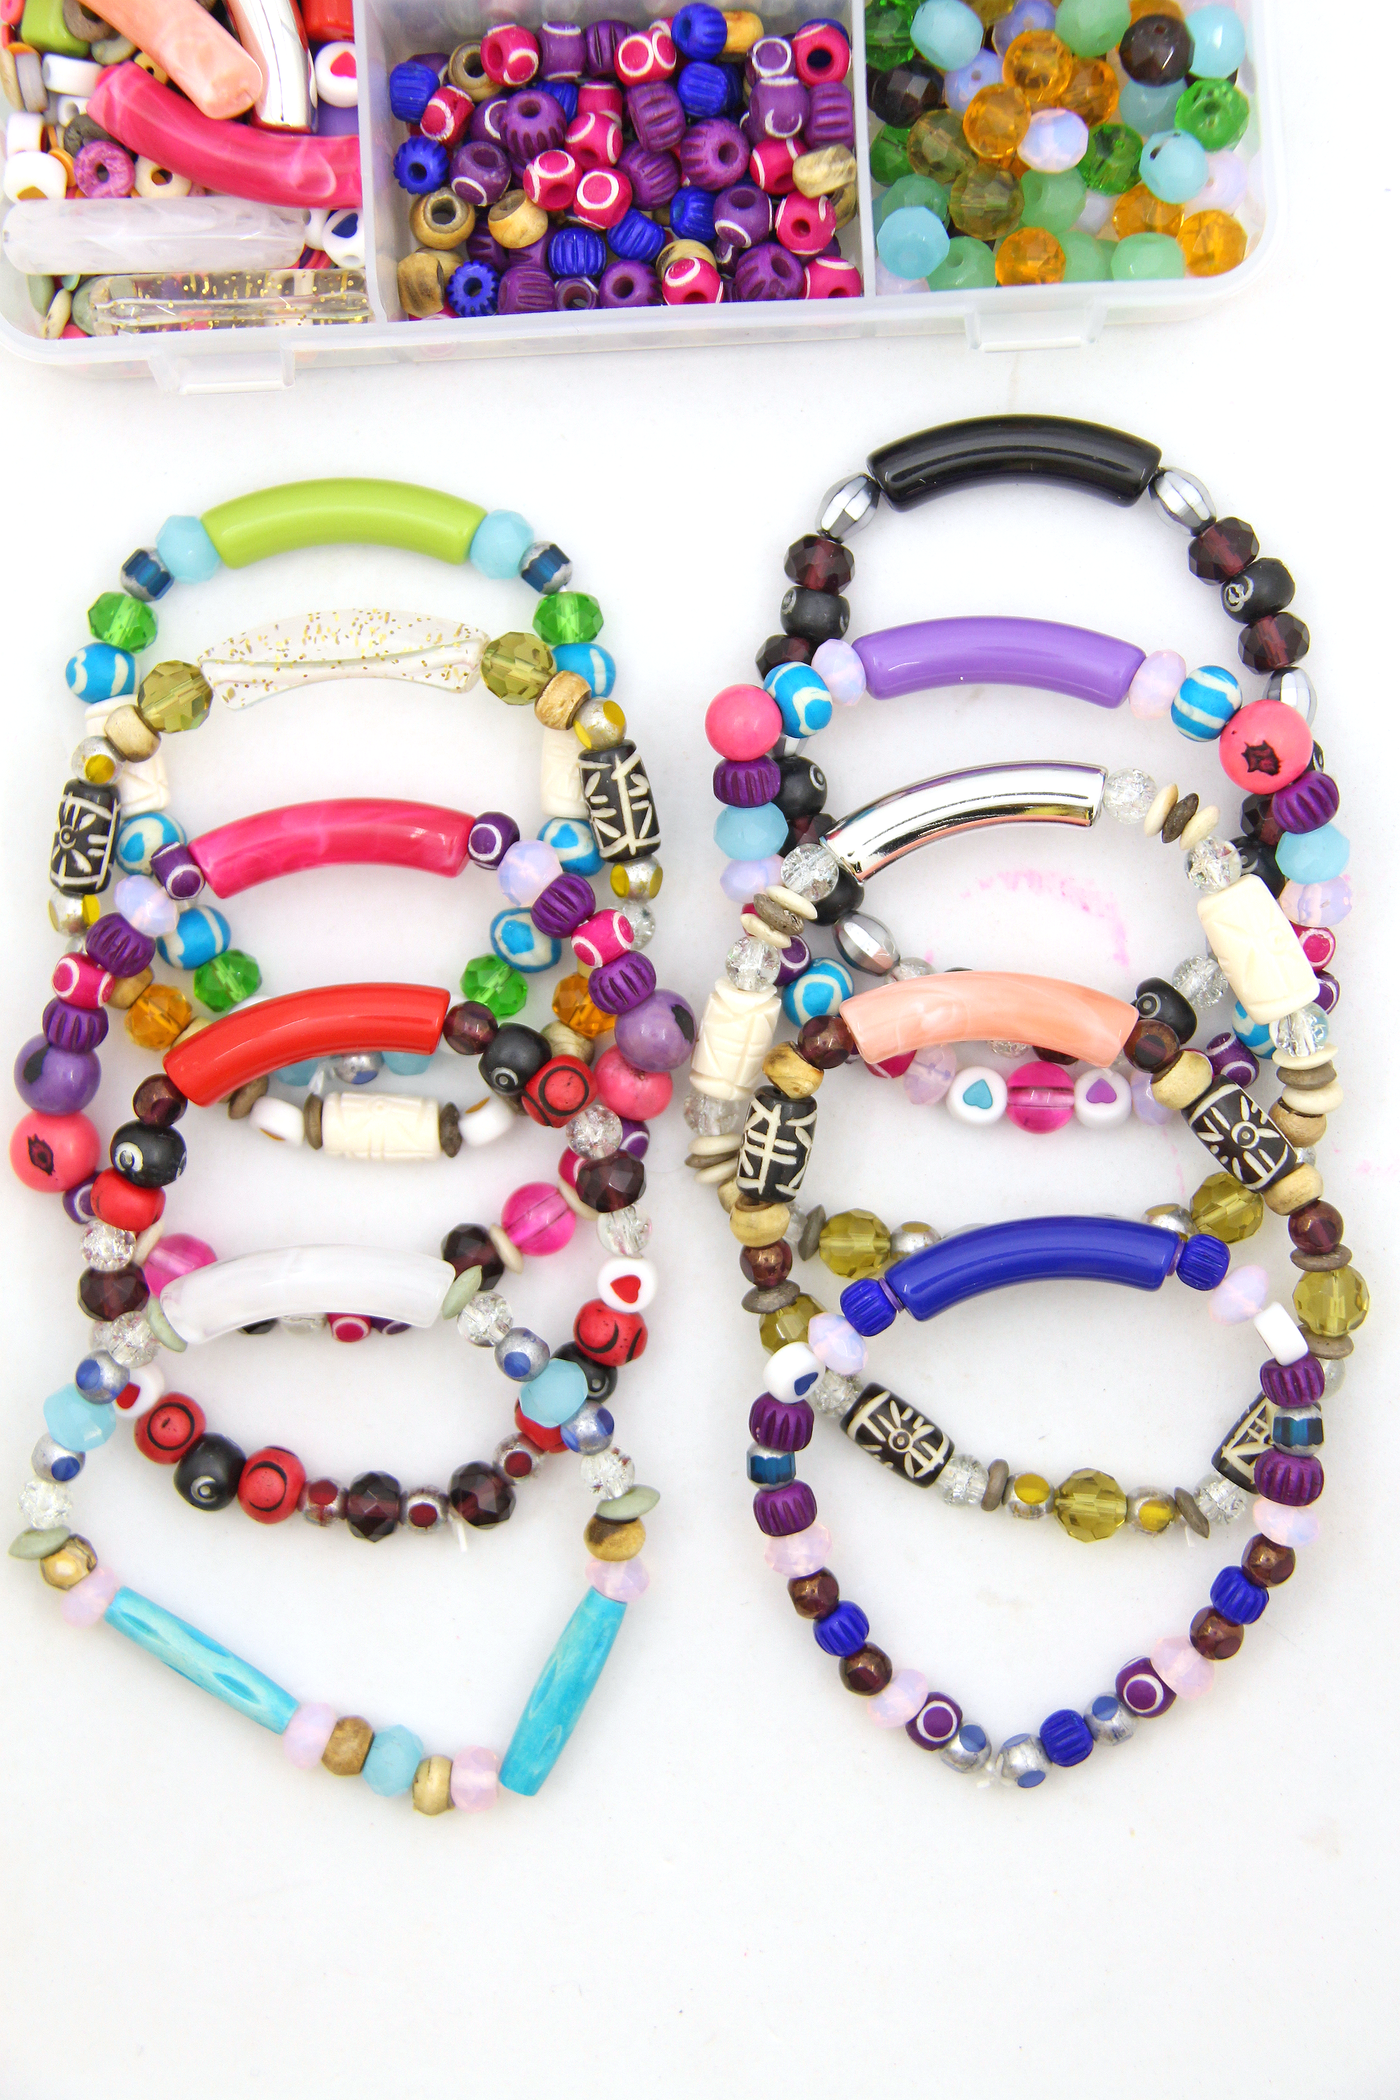 How to make friendship bracelets with beads